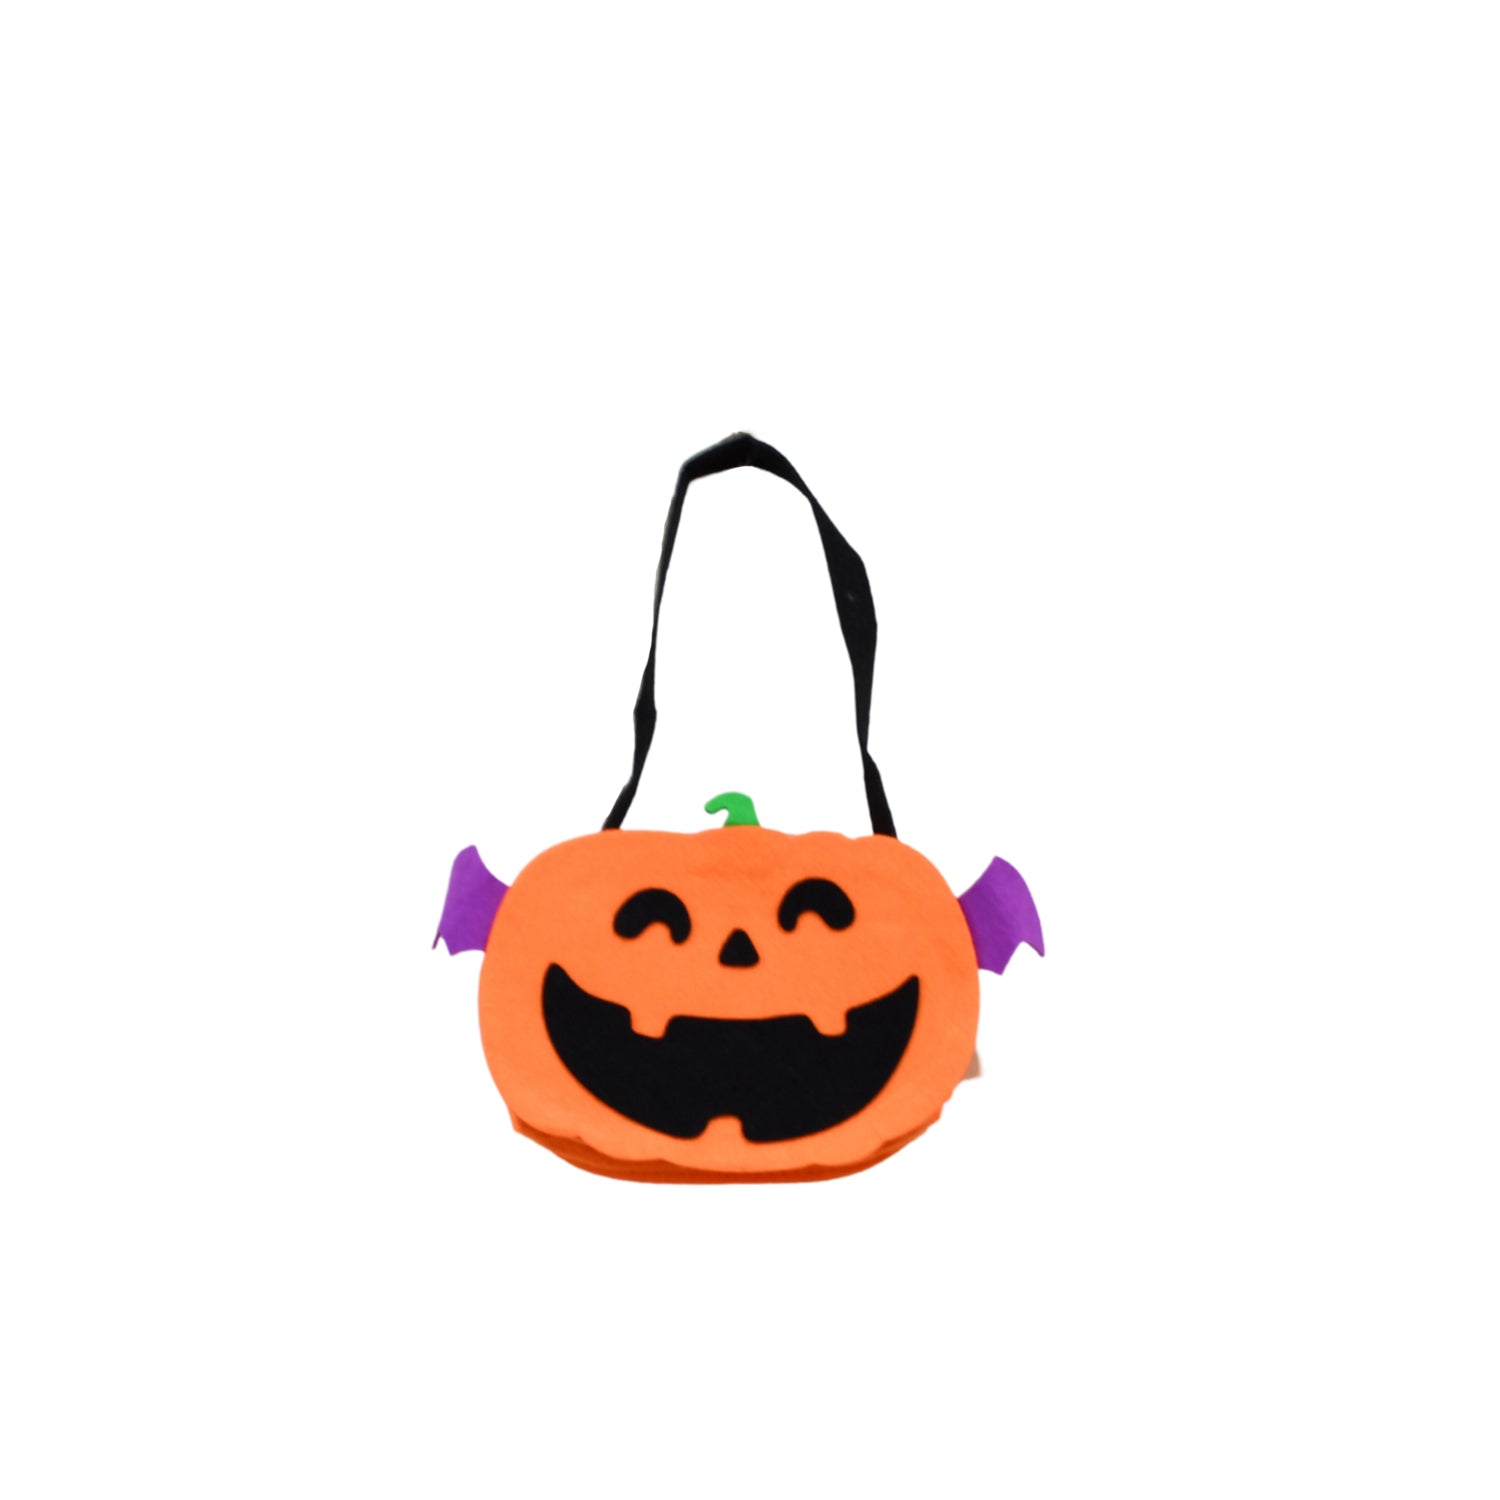 6929 Halloween Pumpkin Bags Non- Woven Candy Bags Trick or Treat Bags Portable Tote Bag Cartoon Goodie Handbag for Halloween Party Favors, Kids Gift Bag